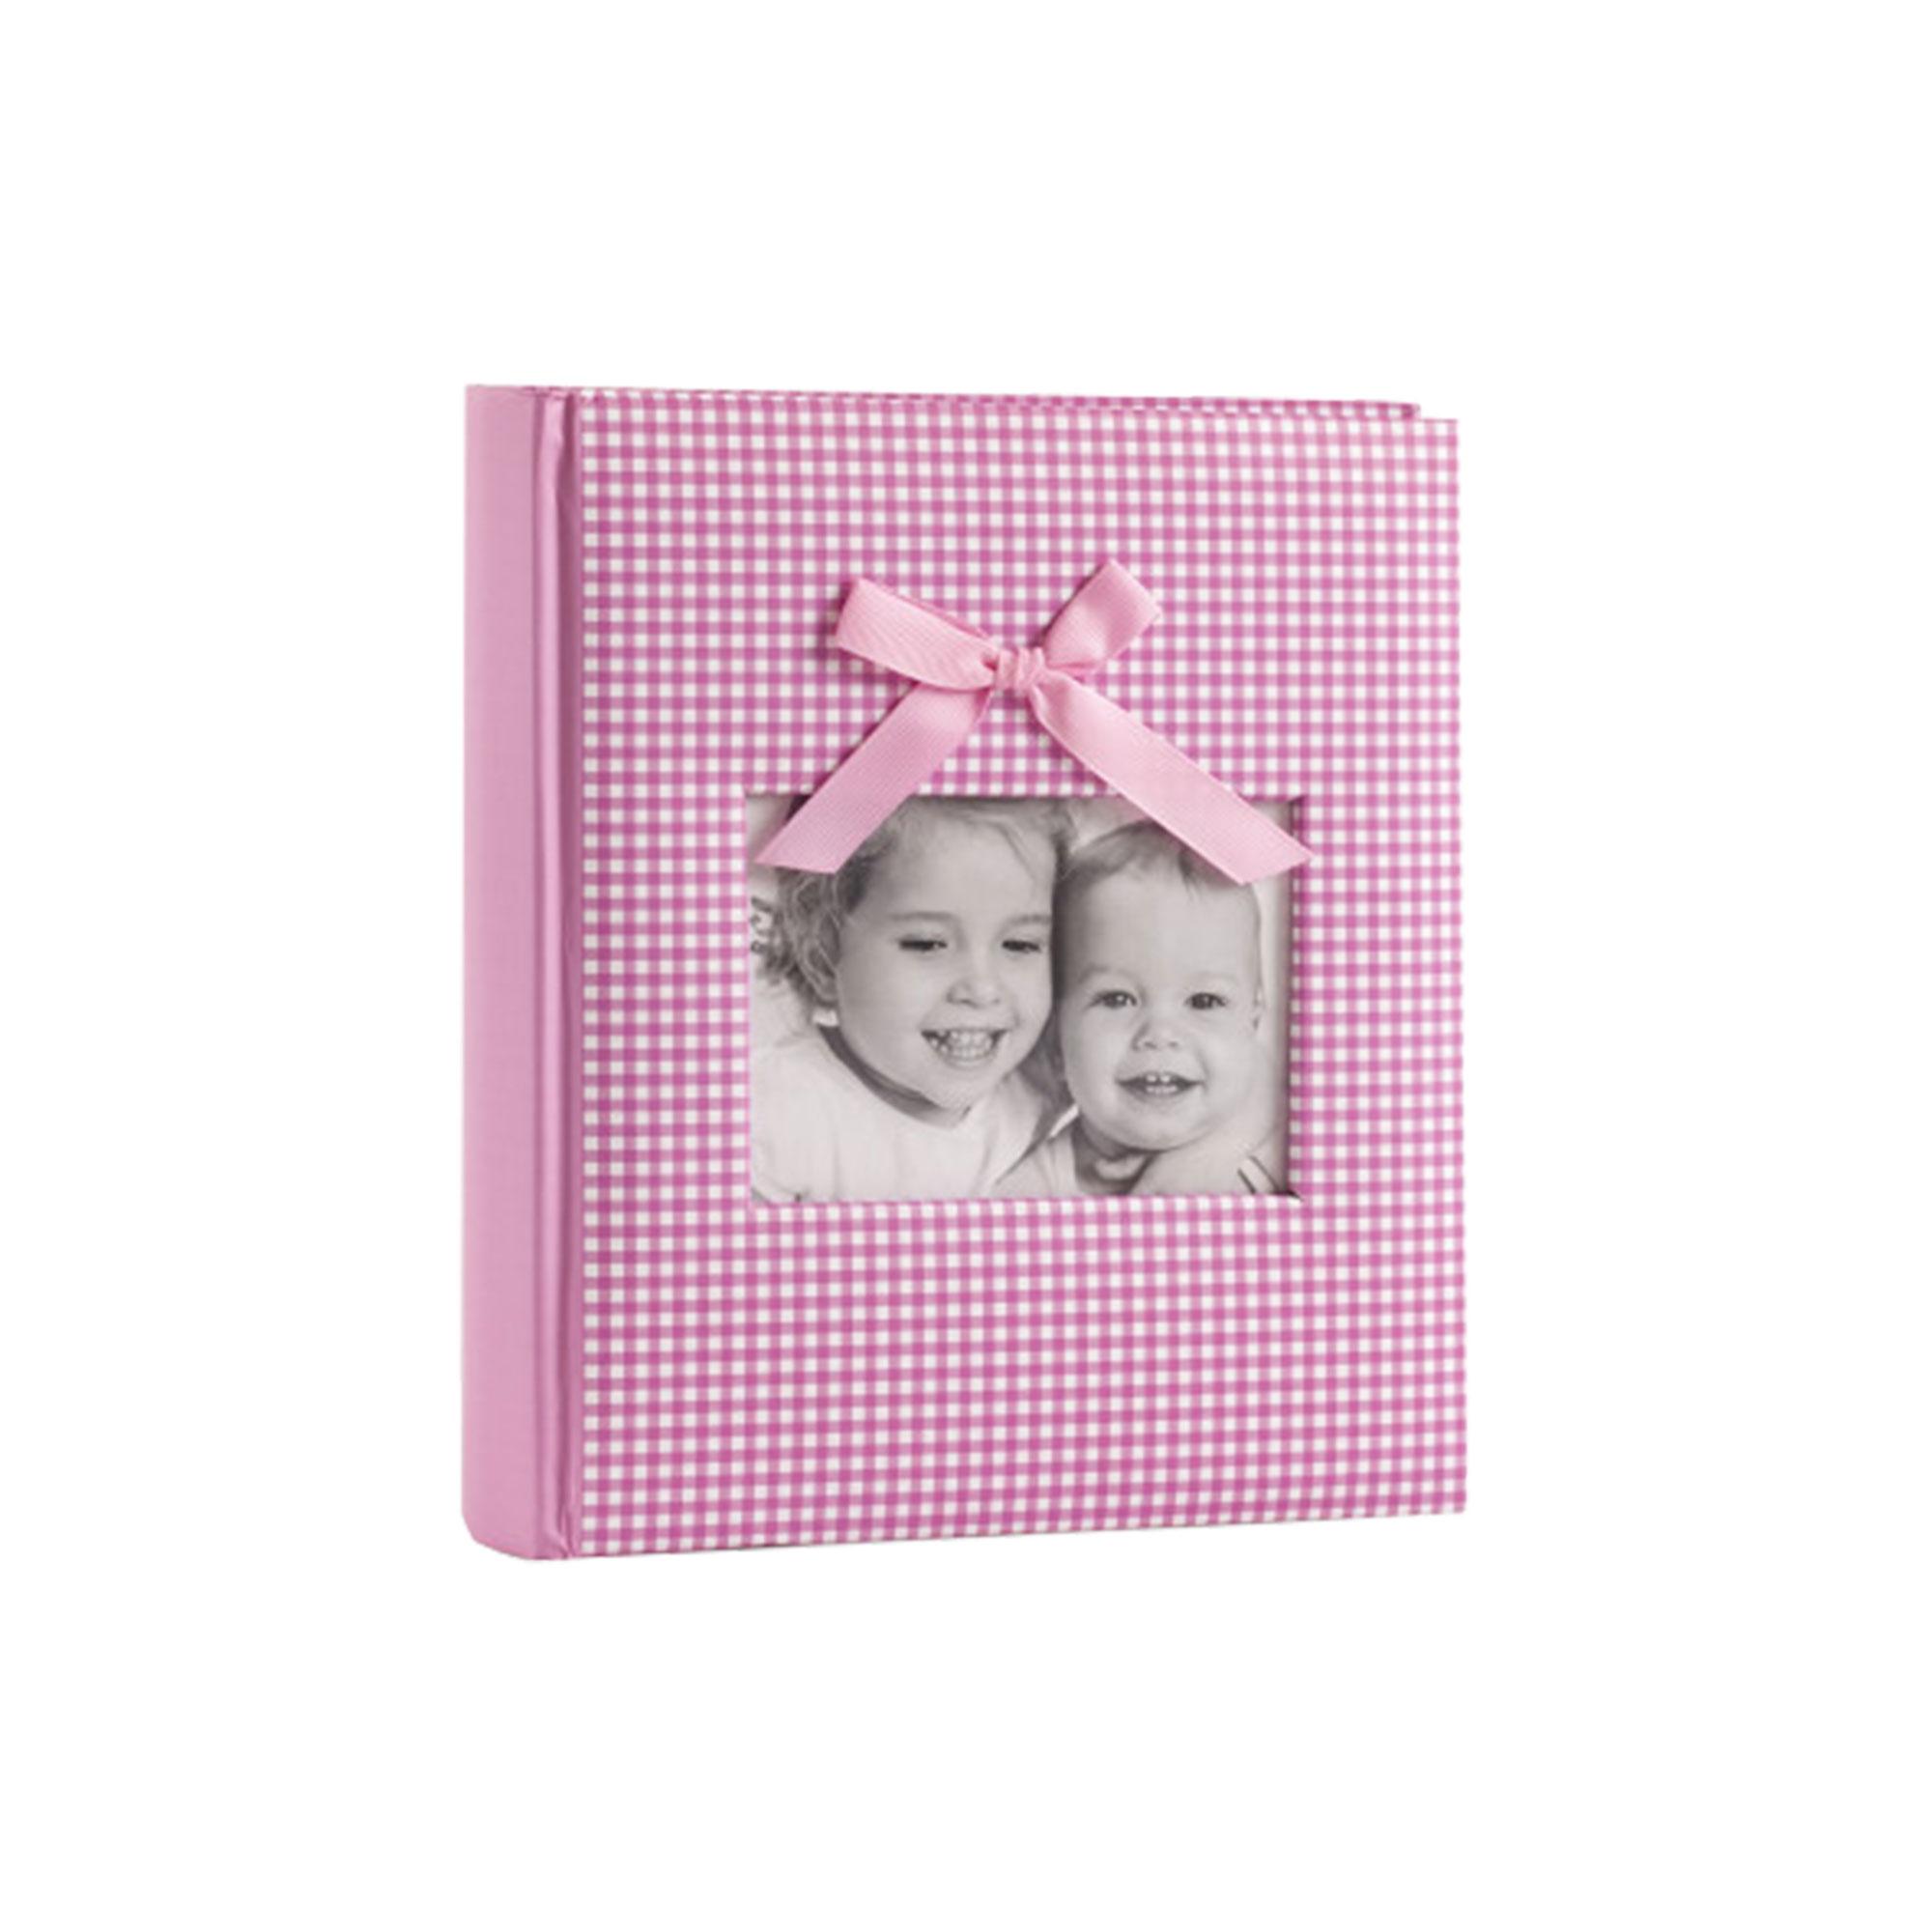 Baby Gingham Fabric with Bow 6x4.5 Slip-in Memo Photo Album - Pink